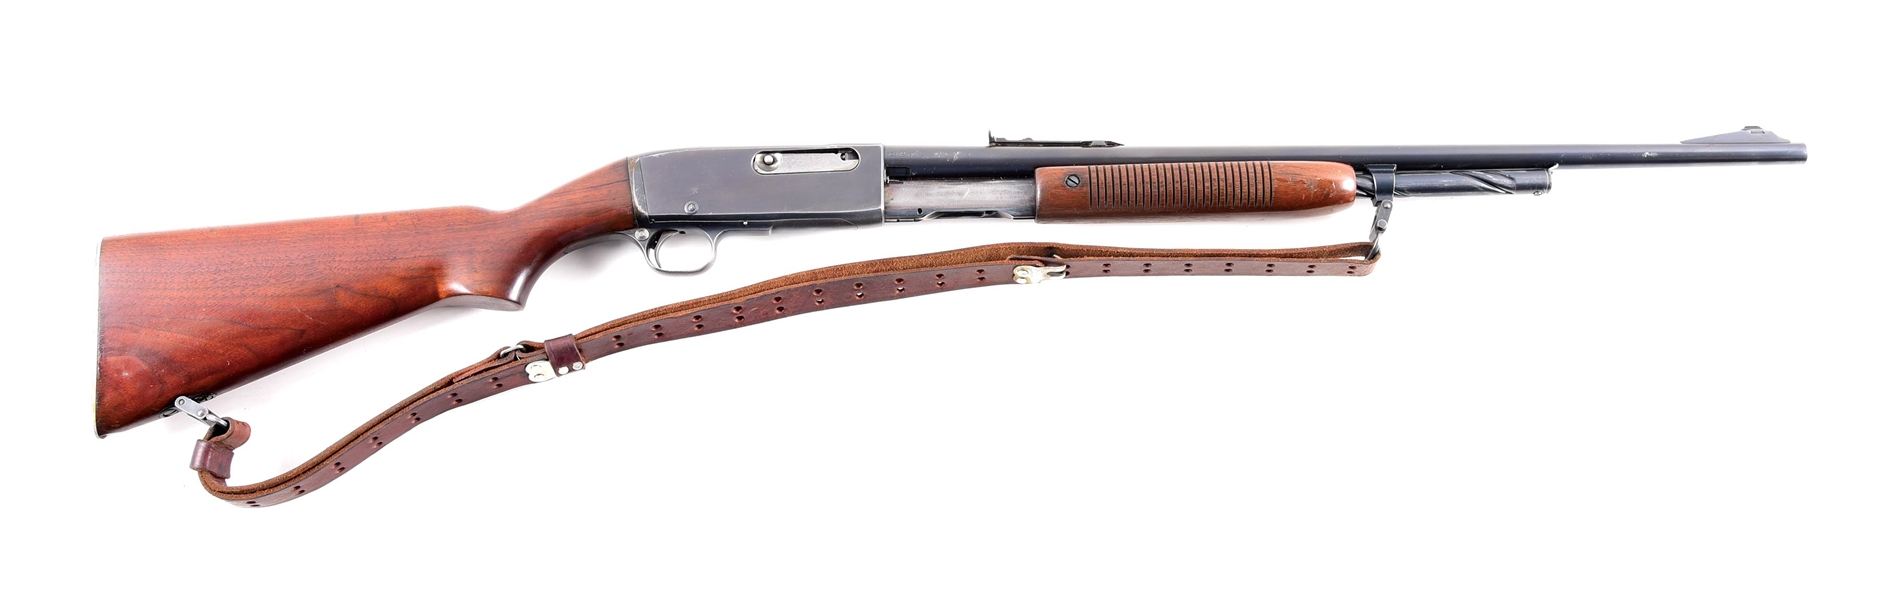 (C) REMINGTON MODEL 141 SLIDE ACTION RIFLE CHAMBERED IN .35 REMINGTON.